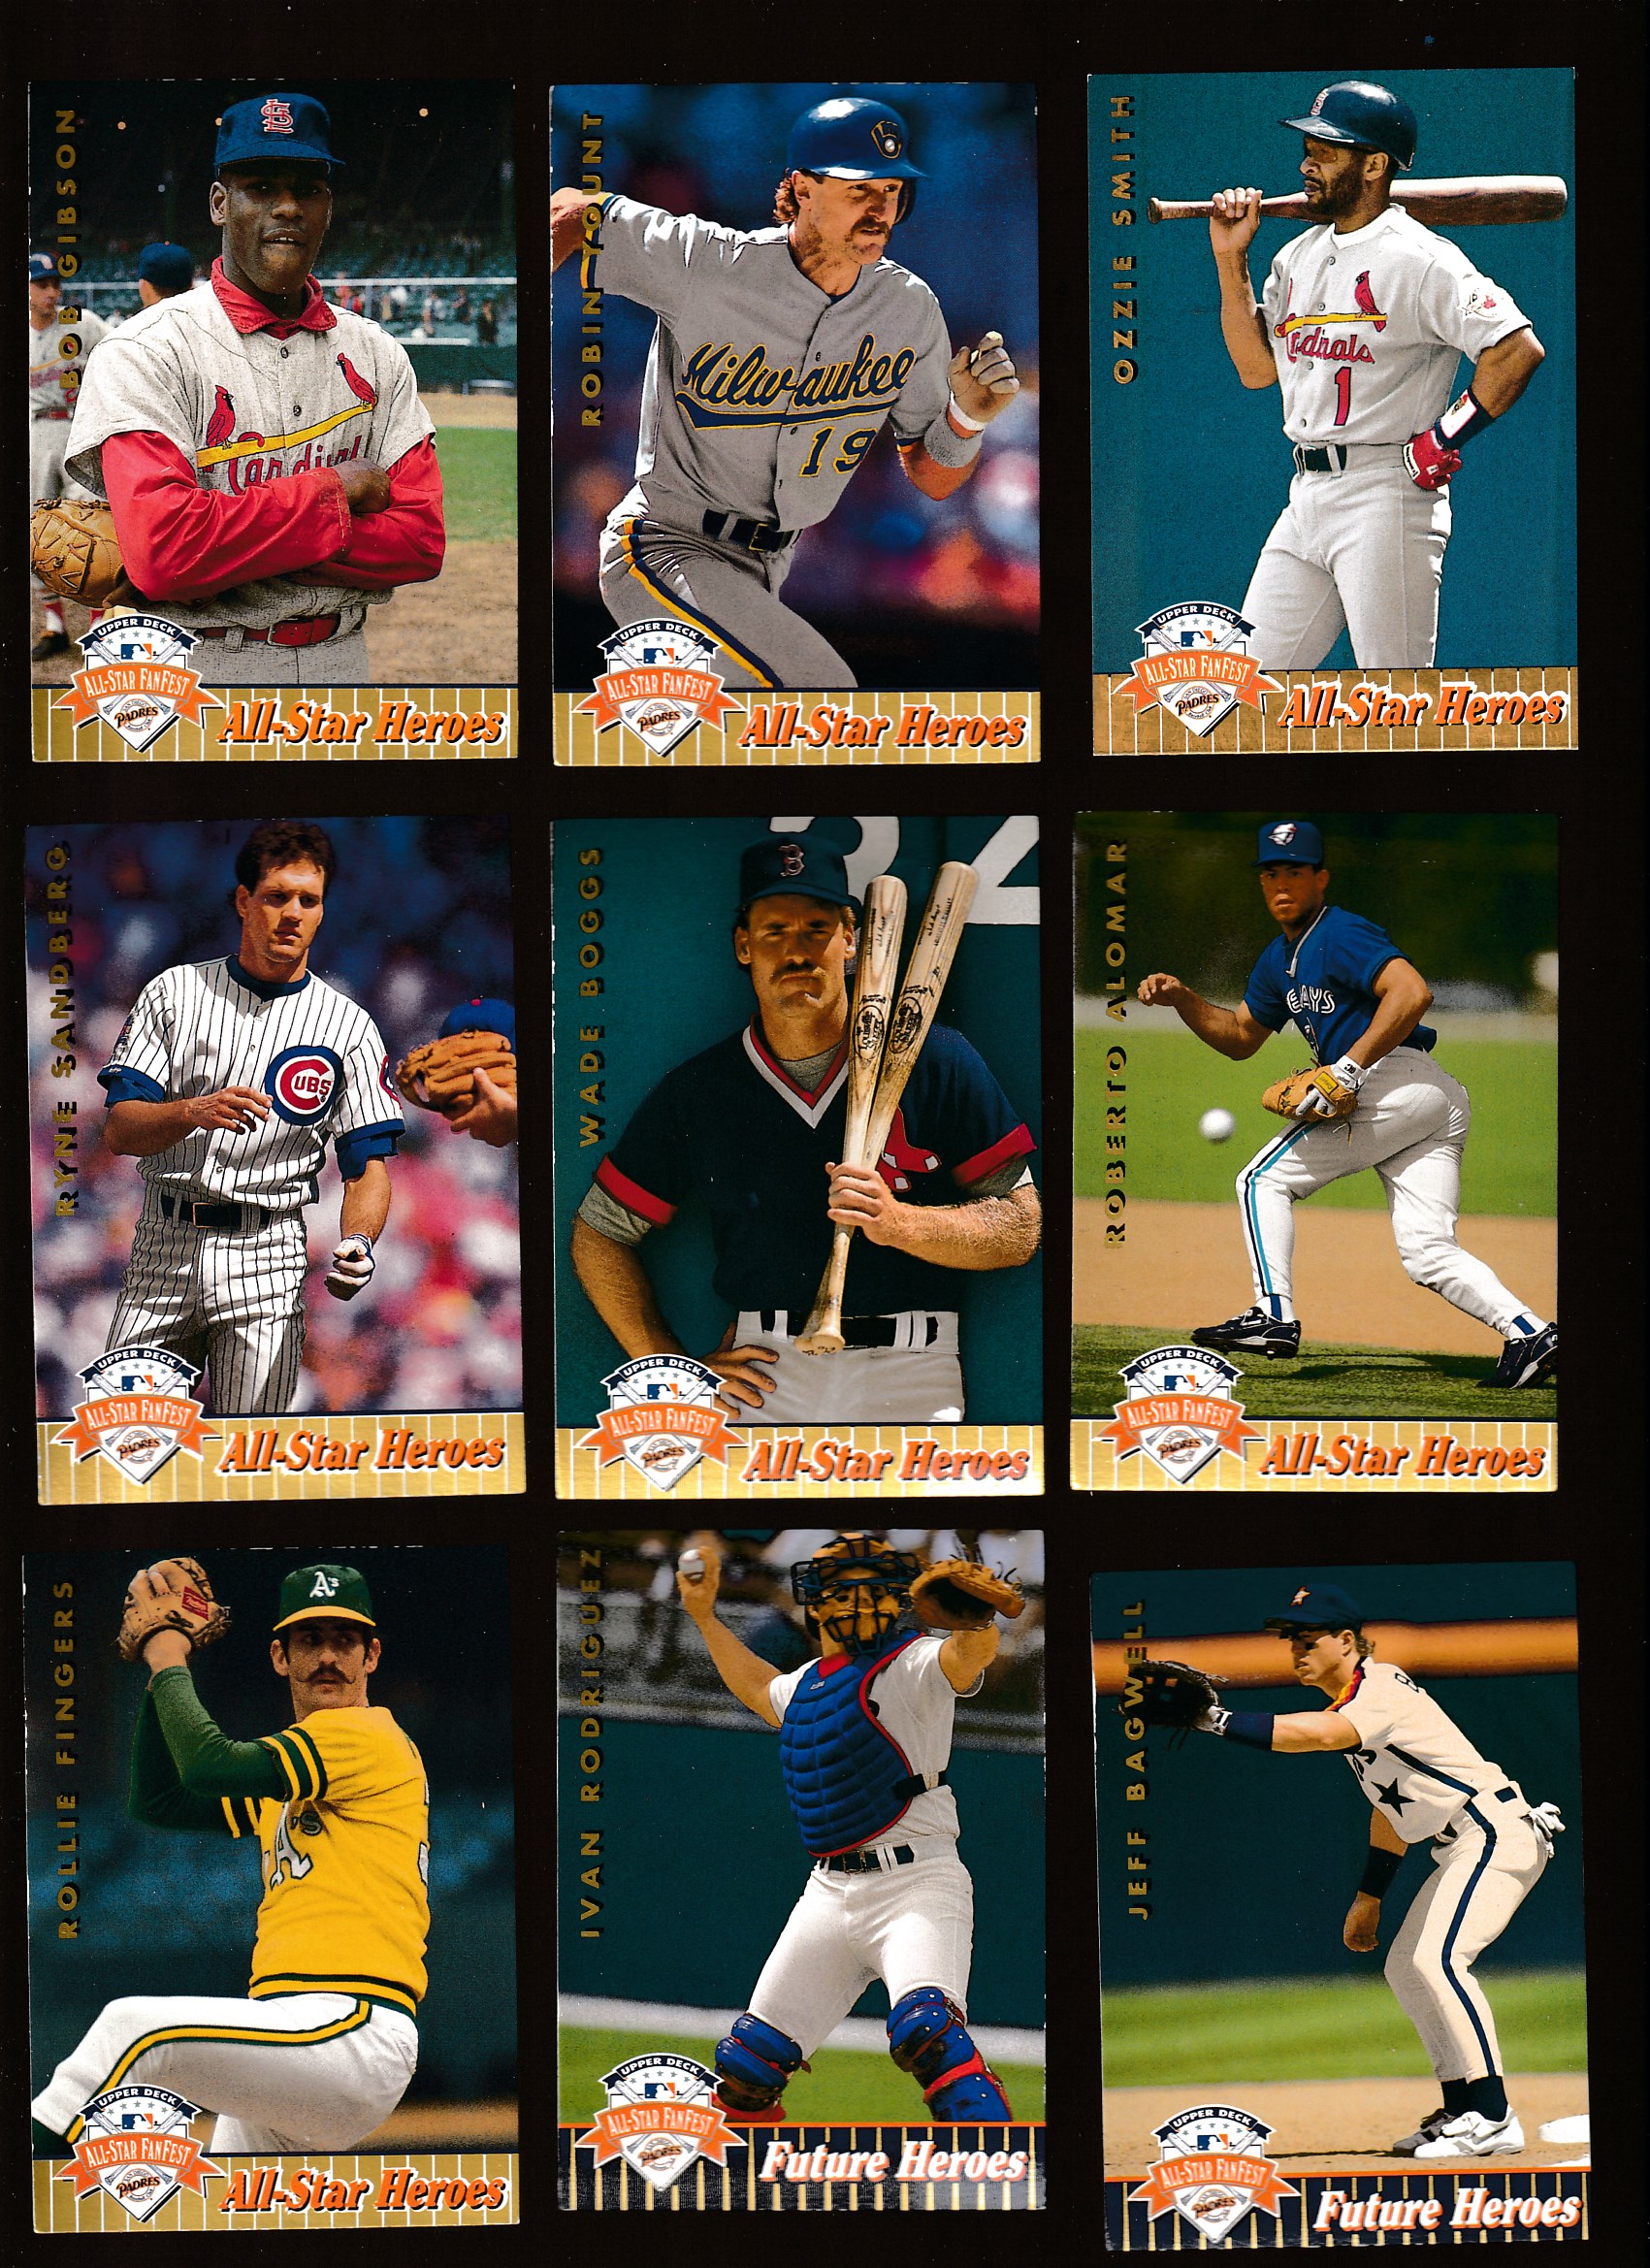   1992 Upper Deck FANFEST GOLD - Lot of (26) diff. w/(9) Hall-of-Famers Baseball cards value